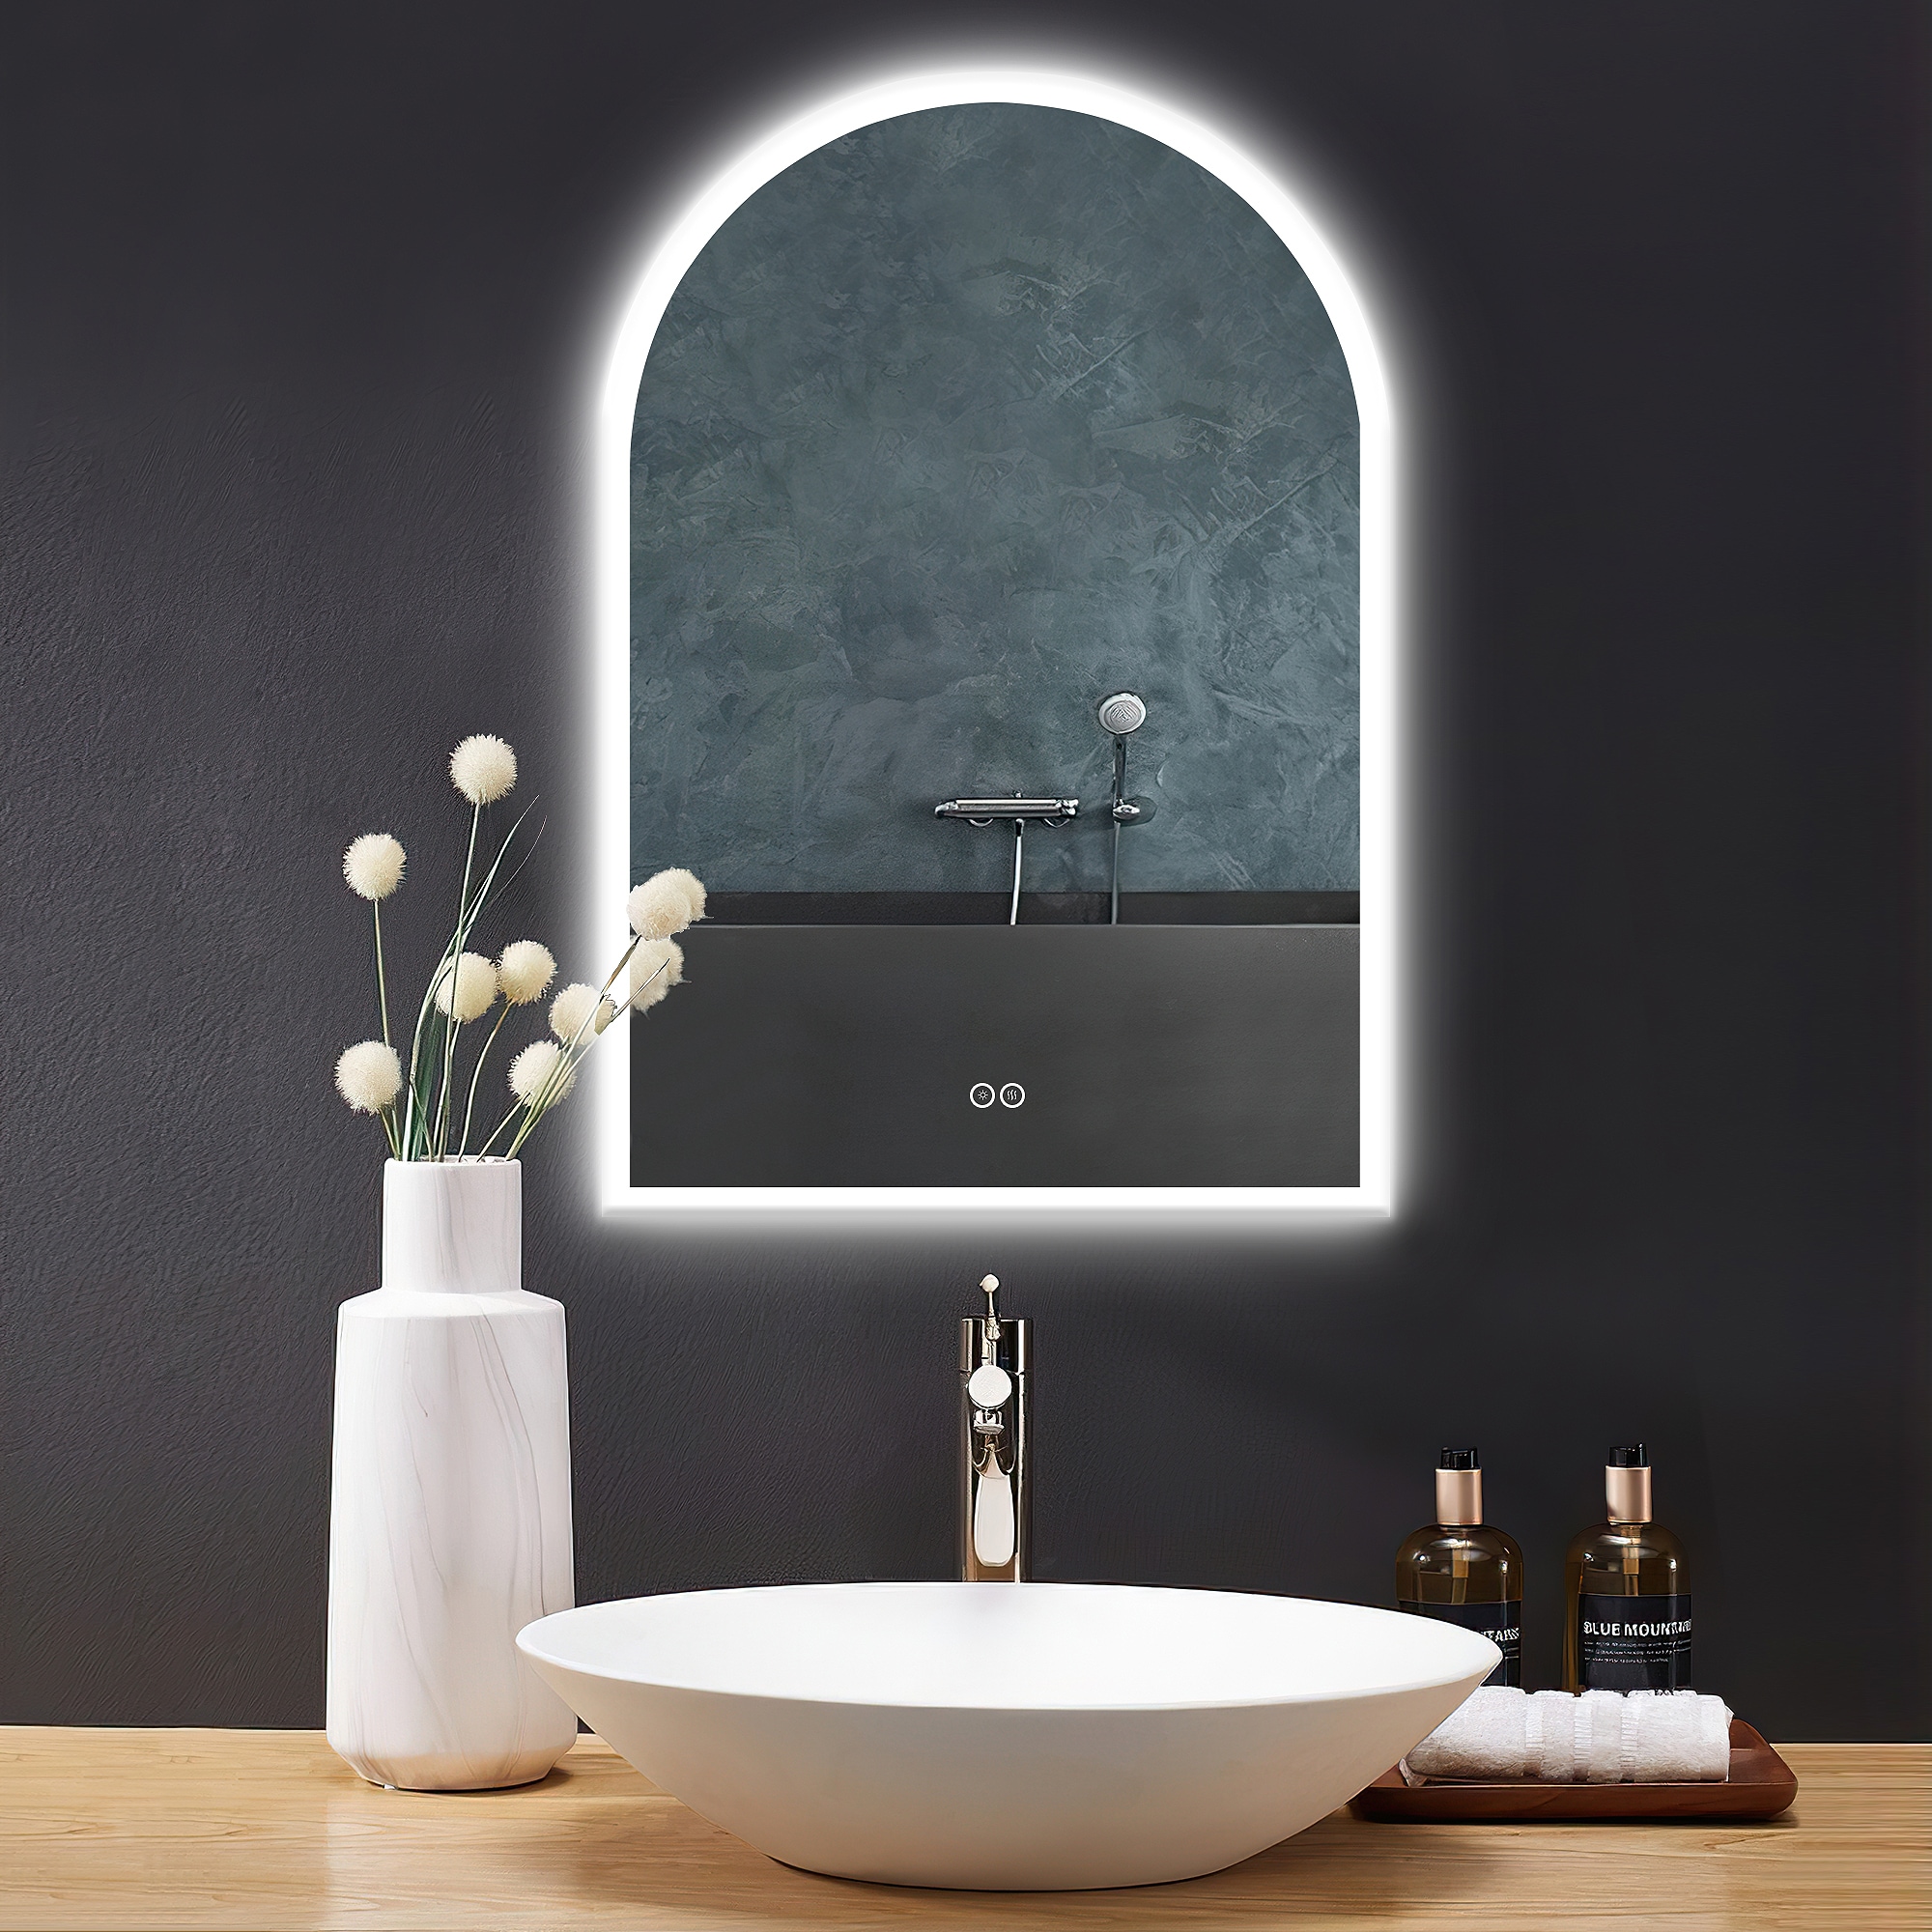 100 Pcs Peel and Stick Mirrors for Wall, Triangle Adhesive Mirror Tiles,  Acrylic Mirror Wall Stickers for Living Room Bedroom Toilet, Flexible  Mirror